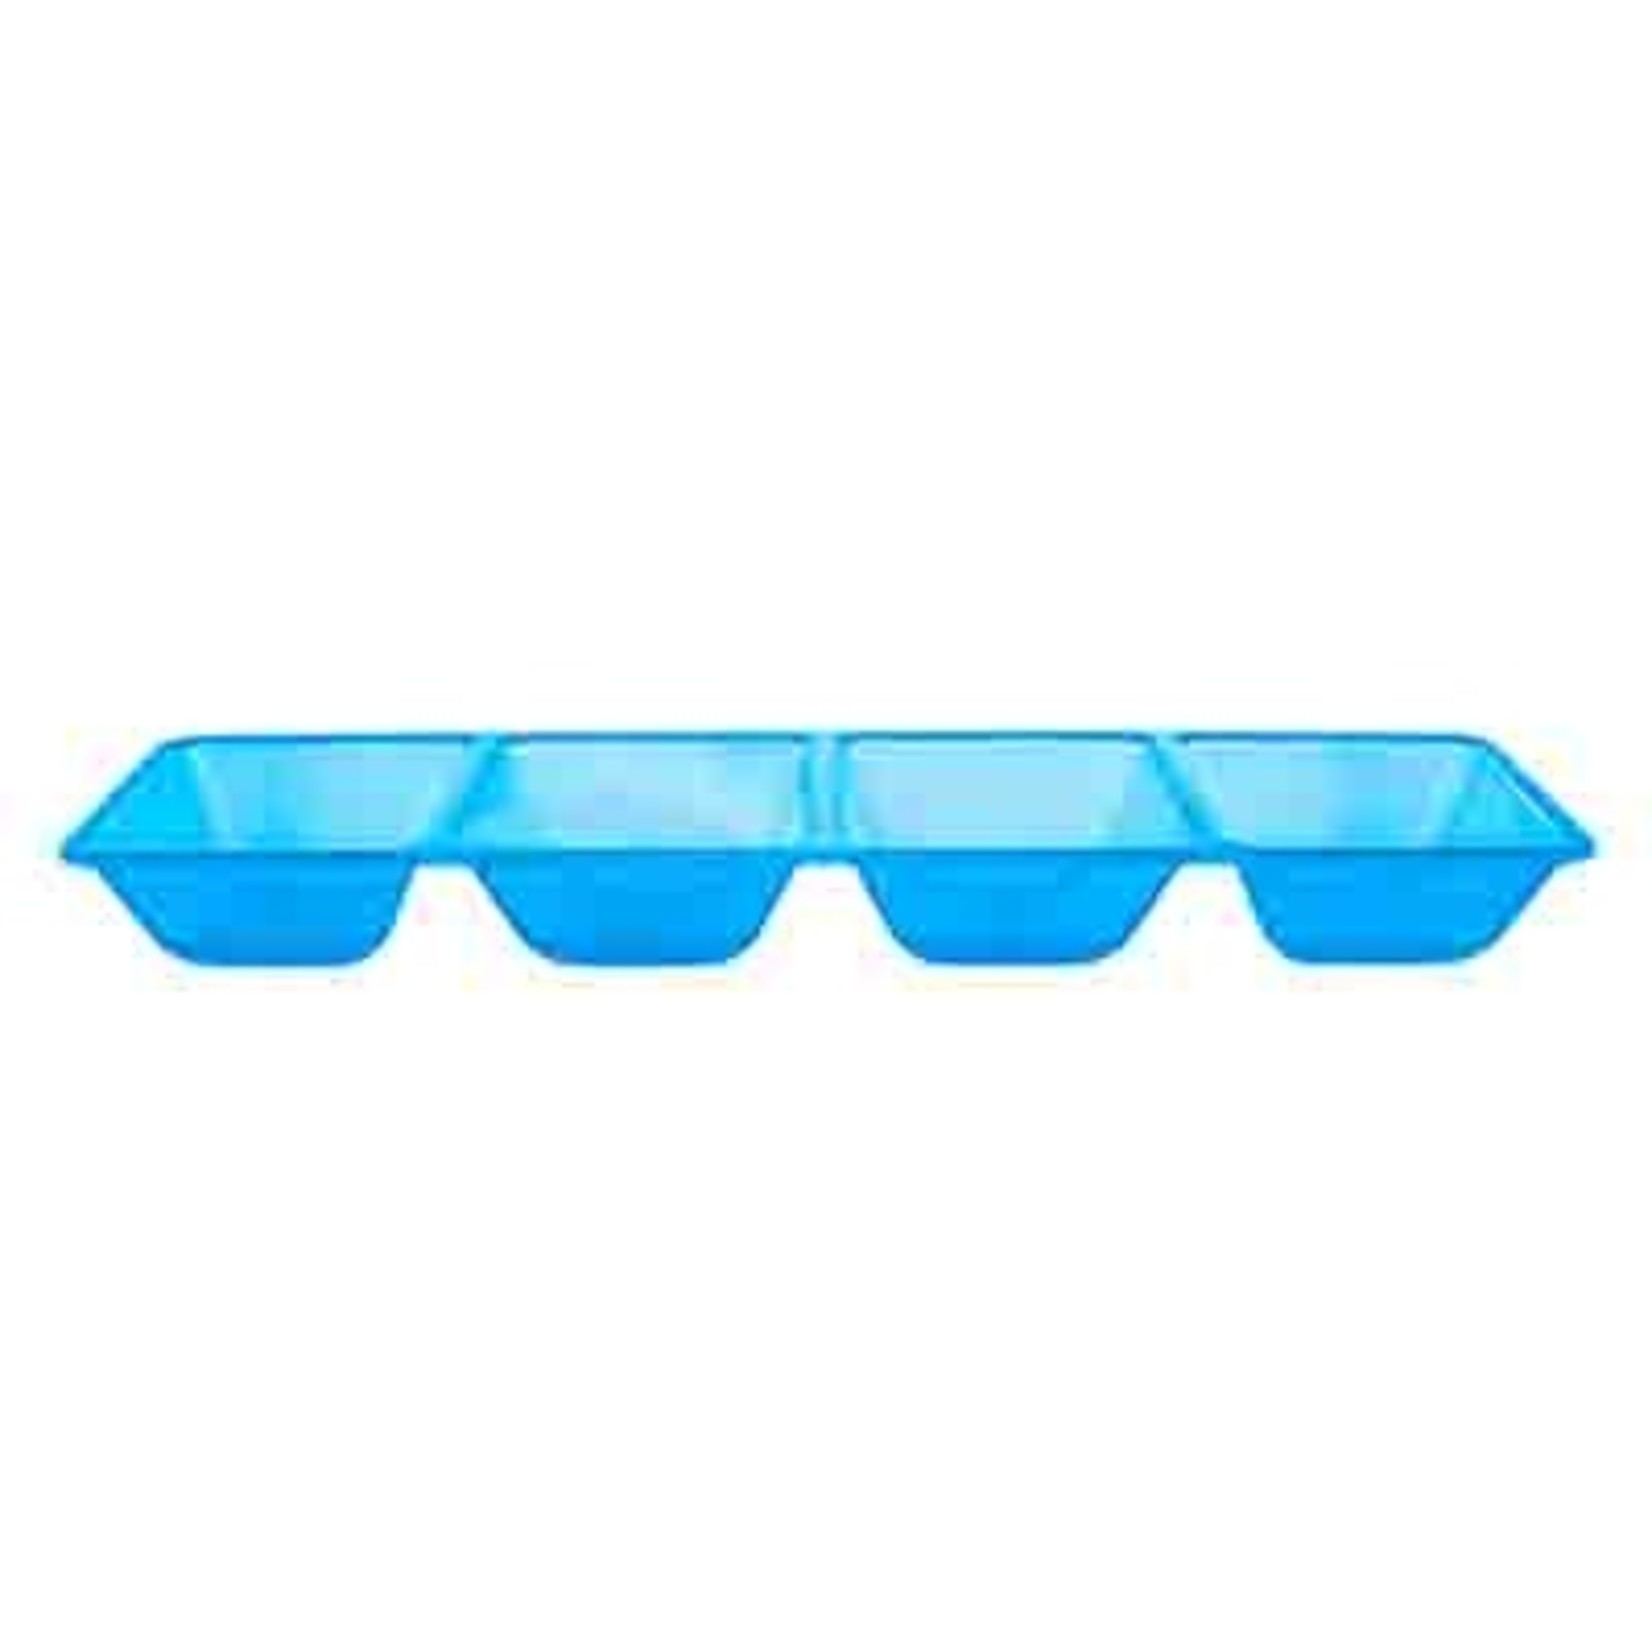 northwest Neon Blue 4 Compartment Serving Tray - 1ct.